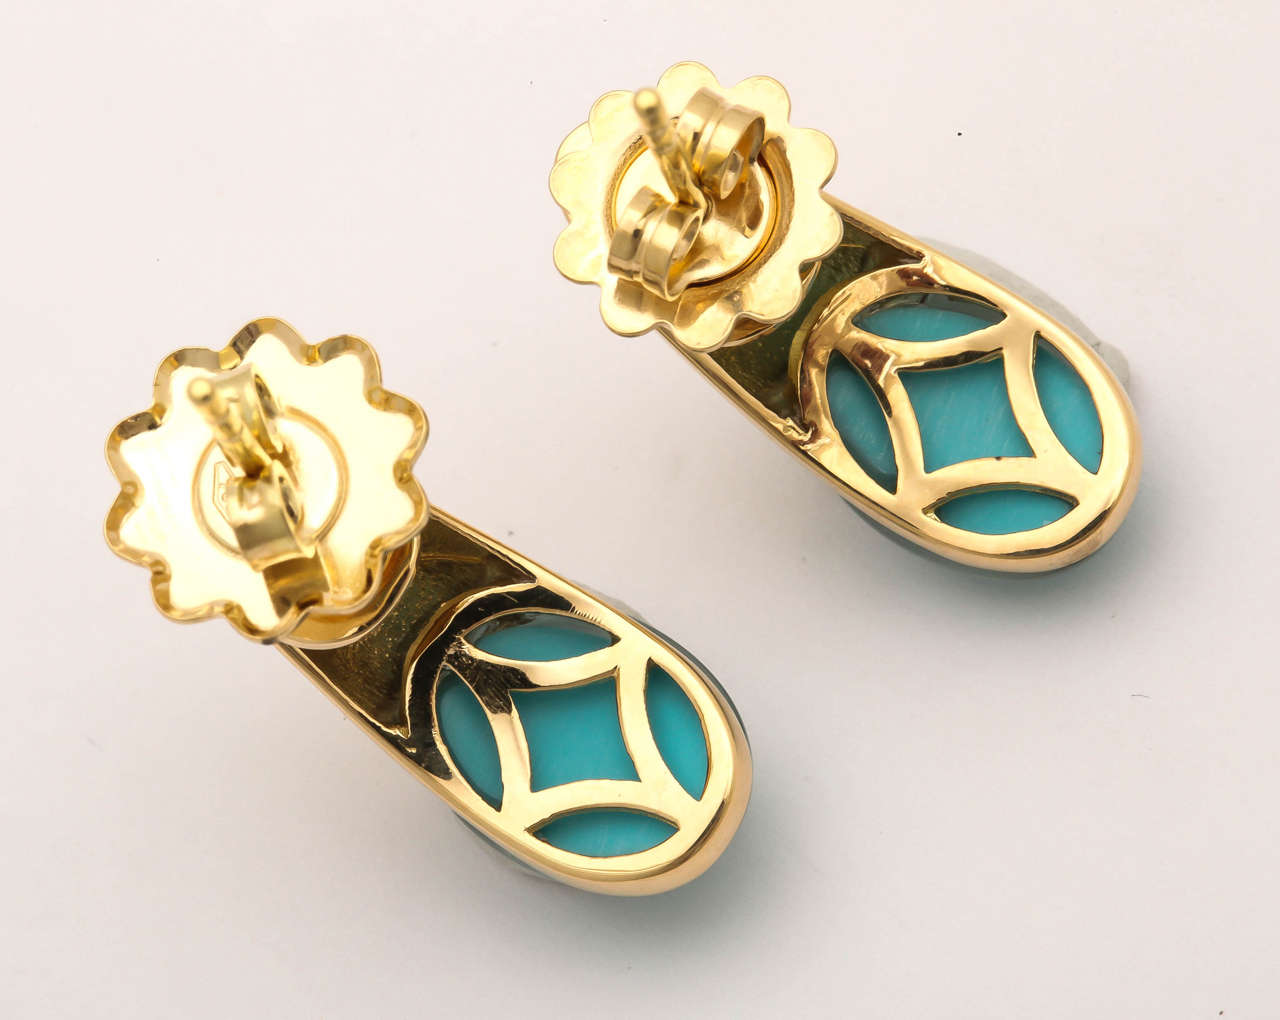 Faraone Mennella Gocce Cabochon Turquoise Gold Earrings For Sale 2